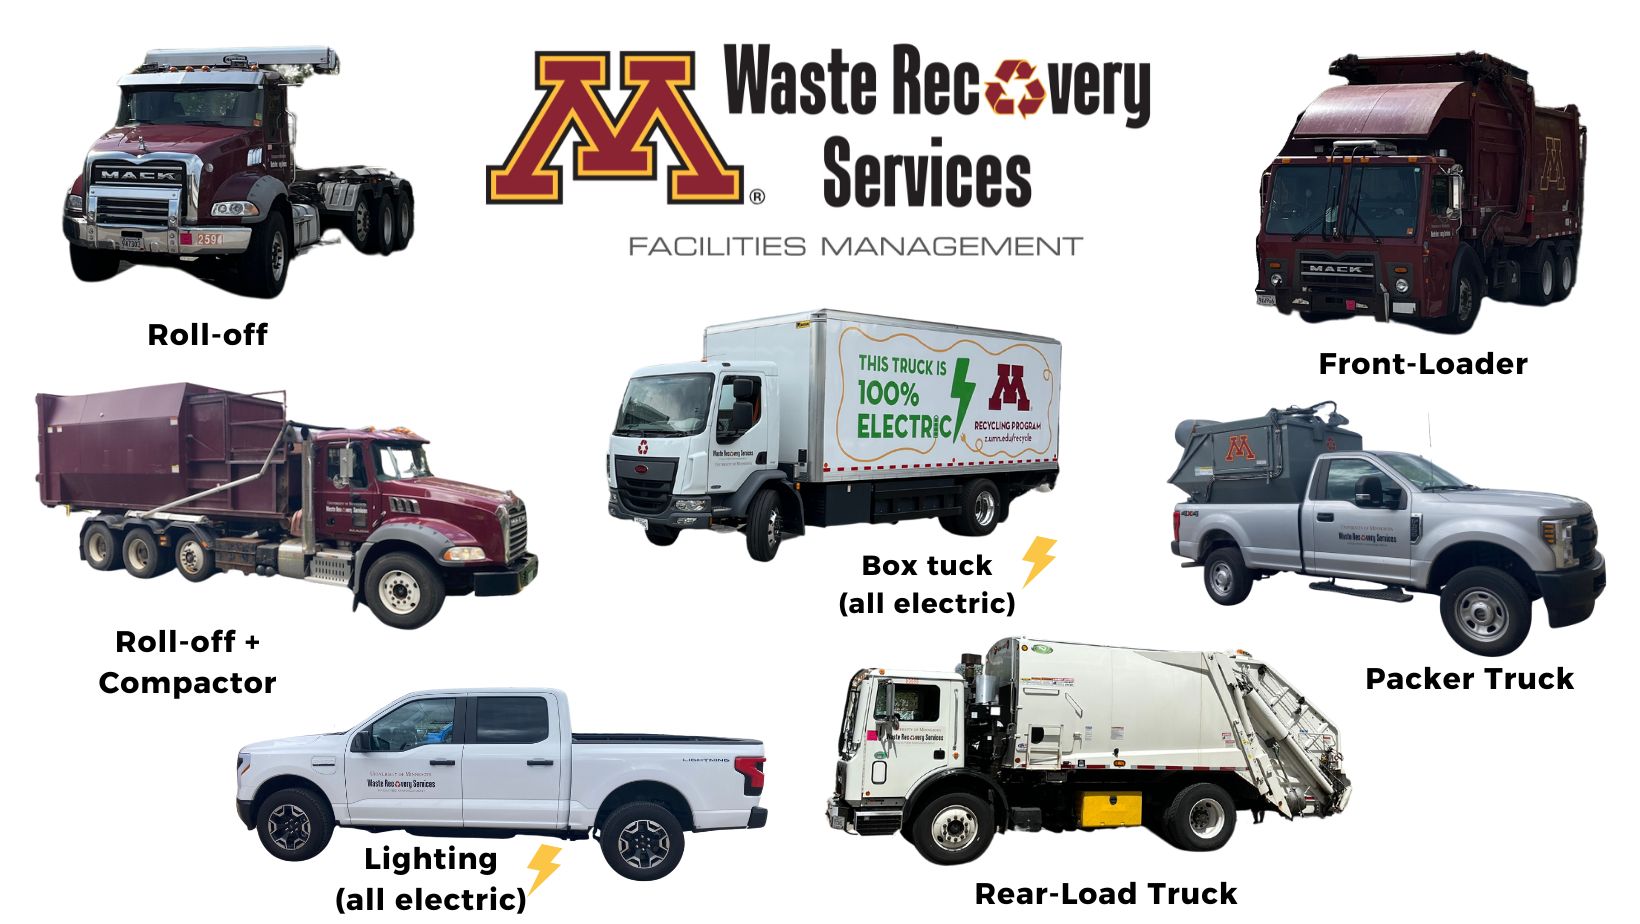 Waste Recovery Services Fleet